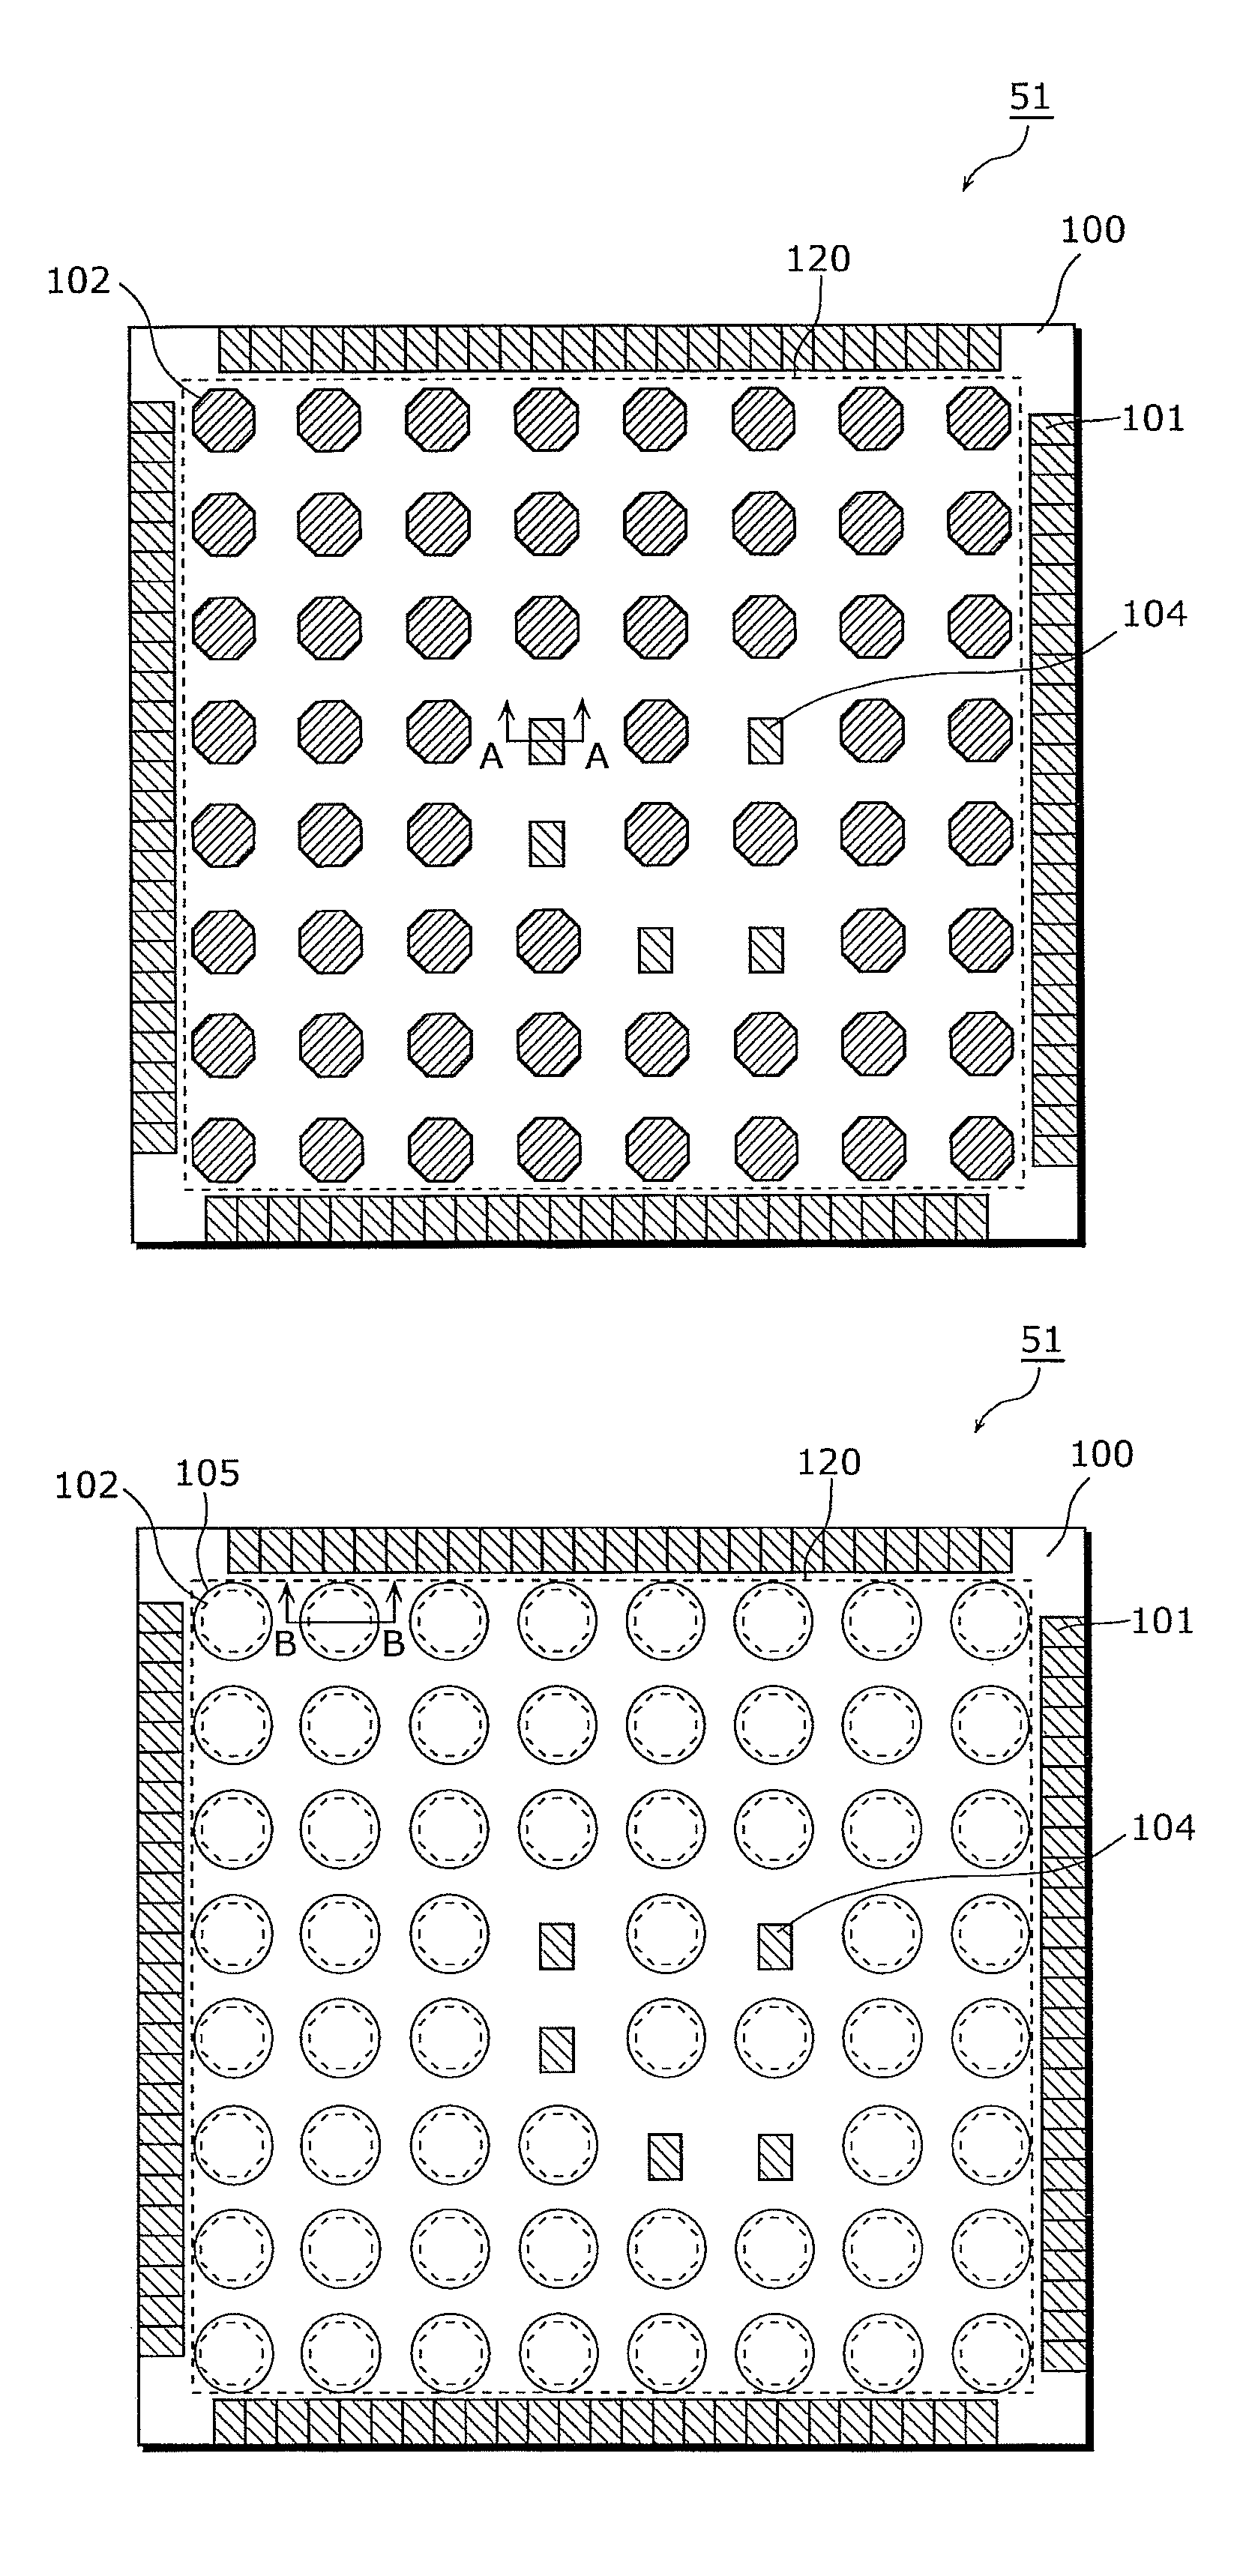 Semiconductor device including external connection pads and test pads